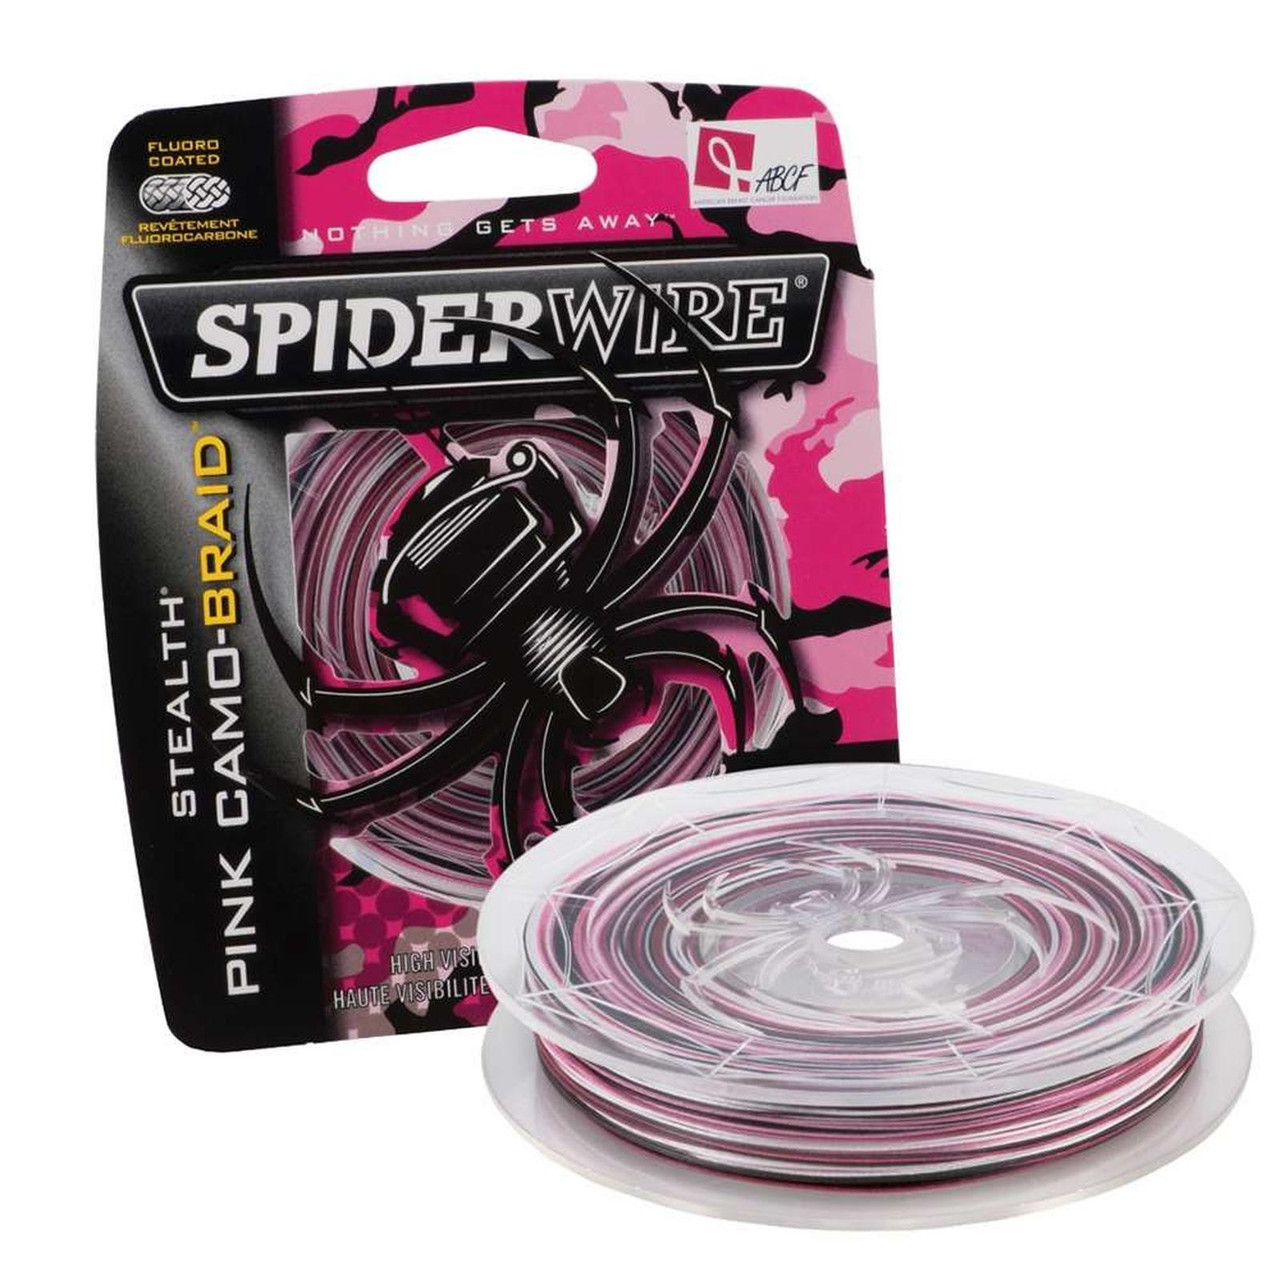 Spiderwire Pink Braided Fishing Fishing Lines & Leaders for sale